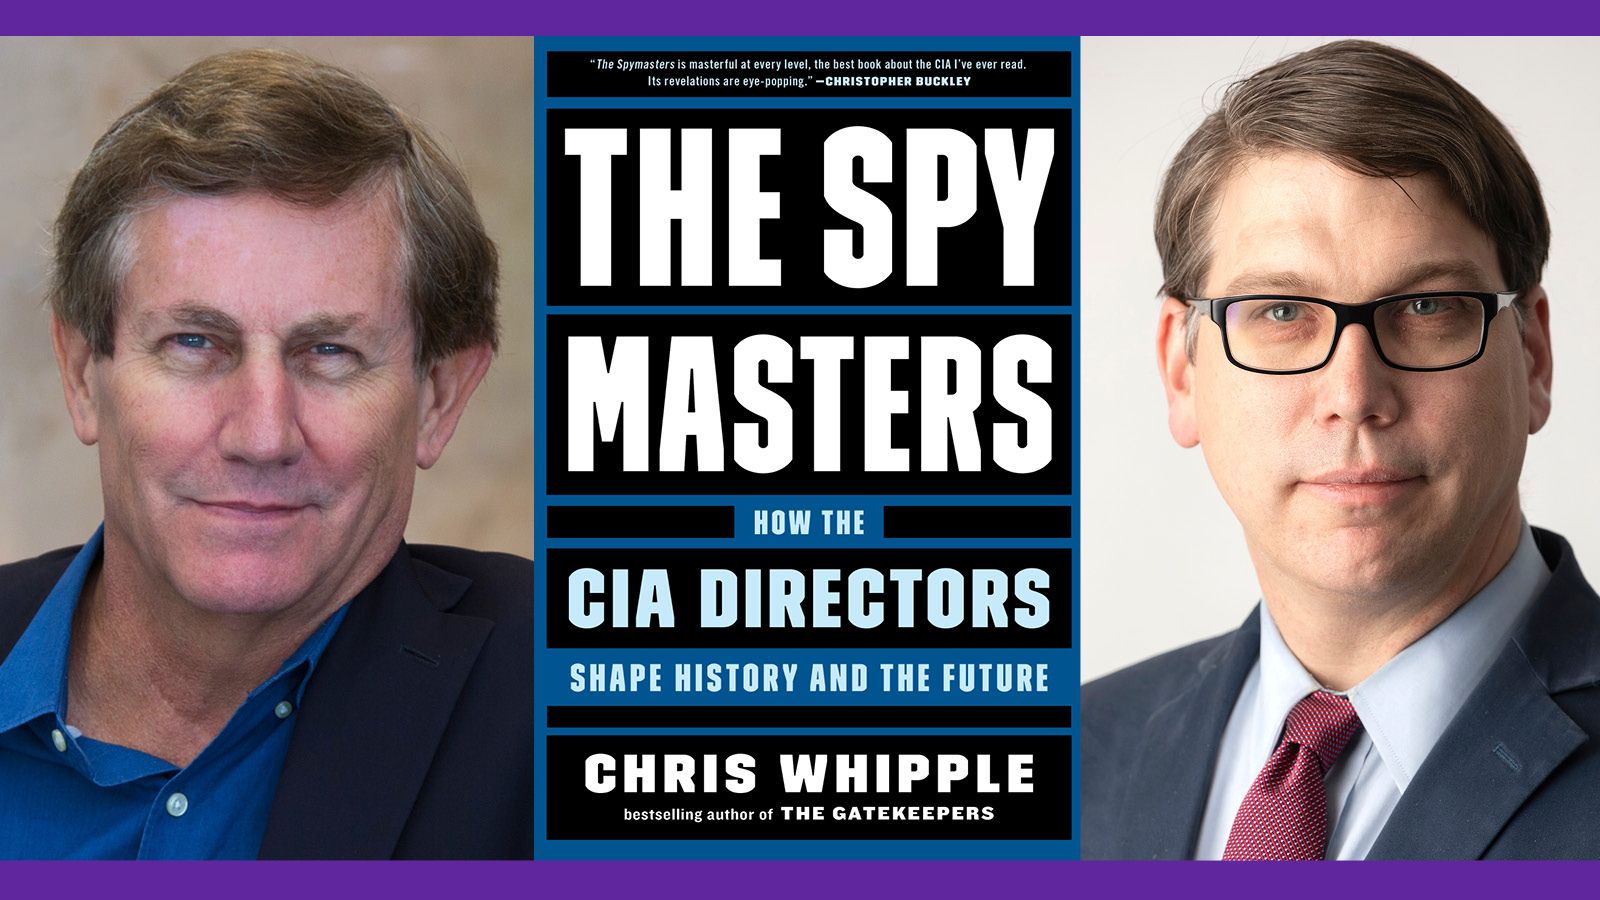 The Spymasters - CIA in the Crosshairs - CBS News